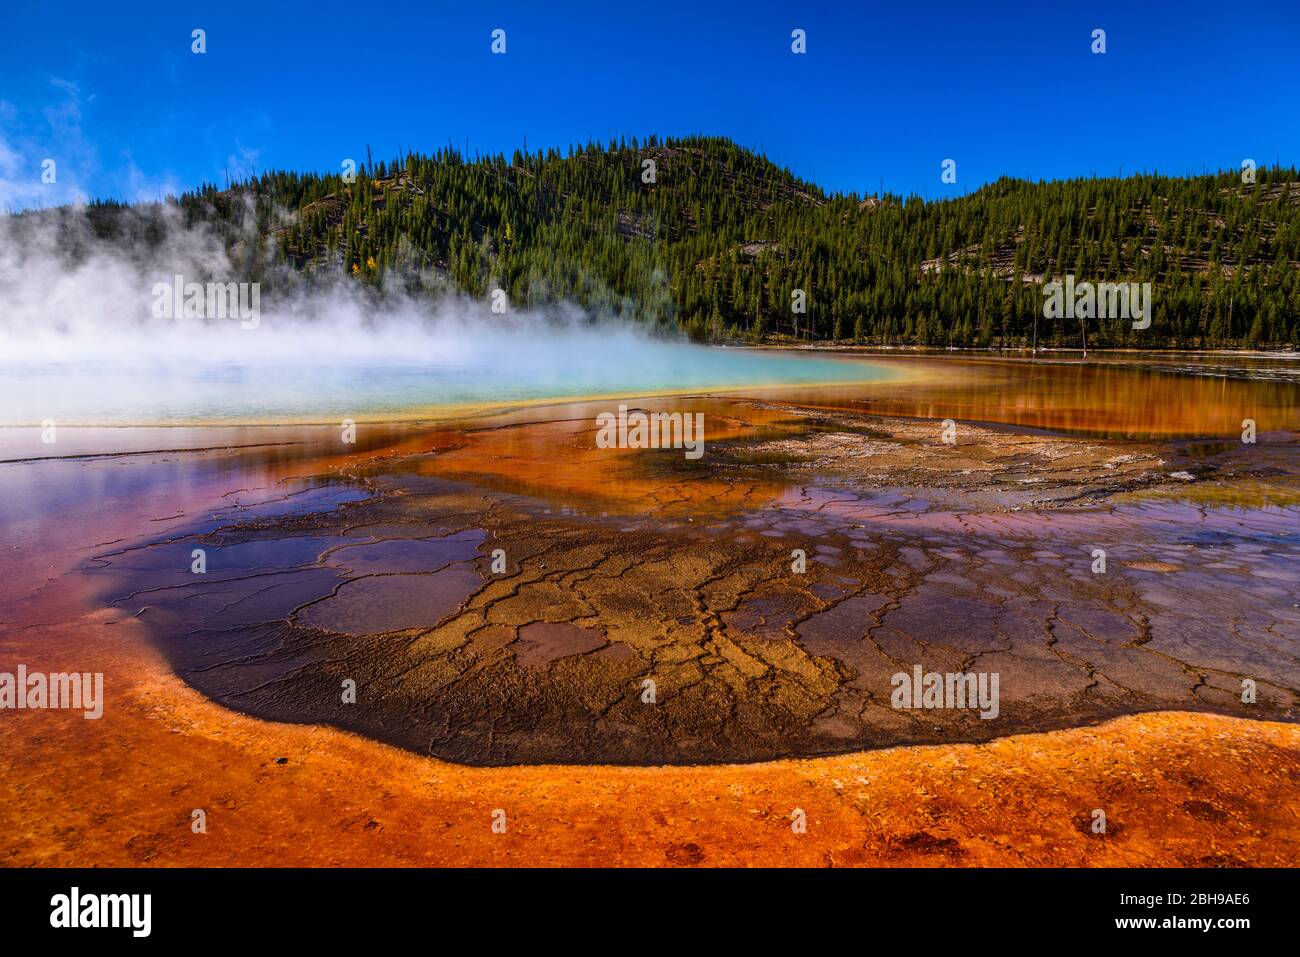 USA, Wyoming, Yellowstone National Park, Midway Geyser Basin, Grand Prismatic Spring Stock Photo